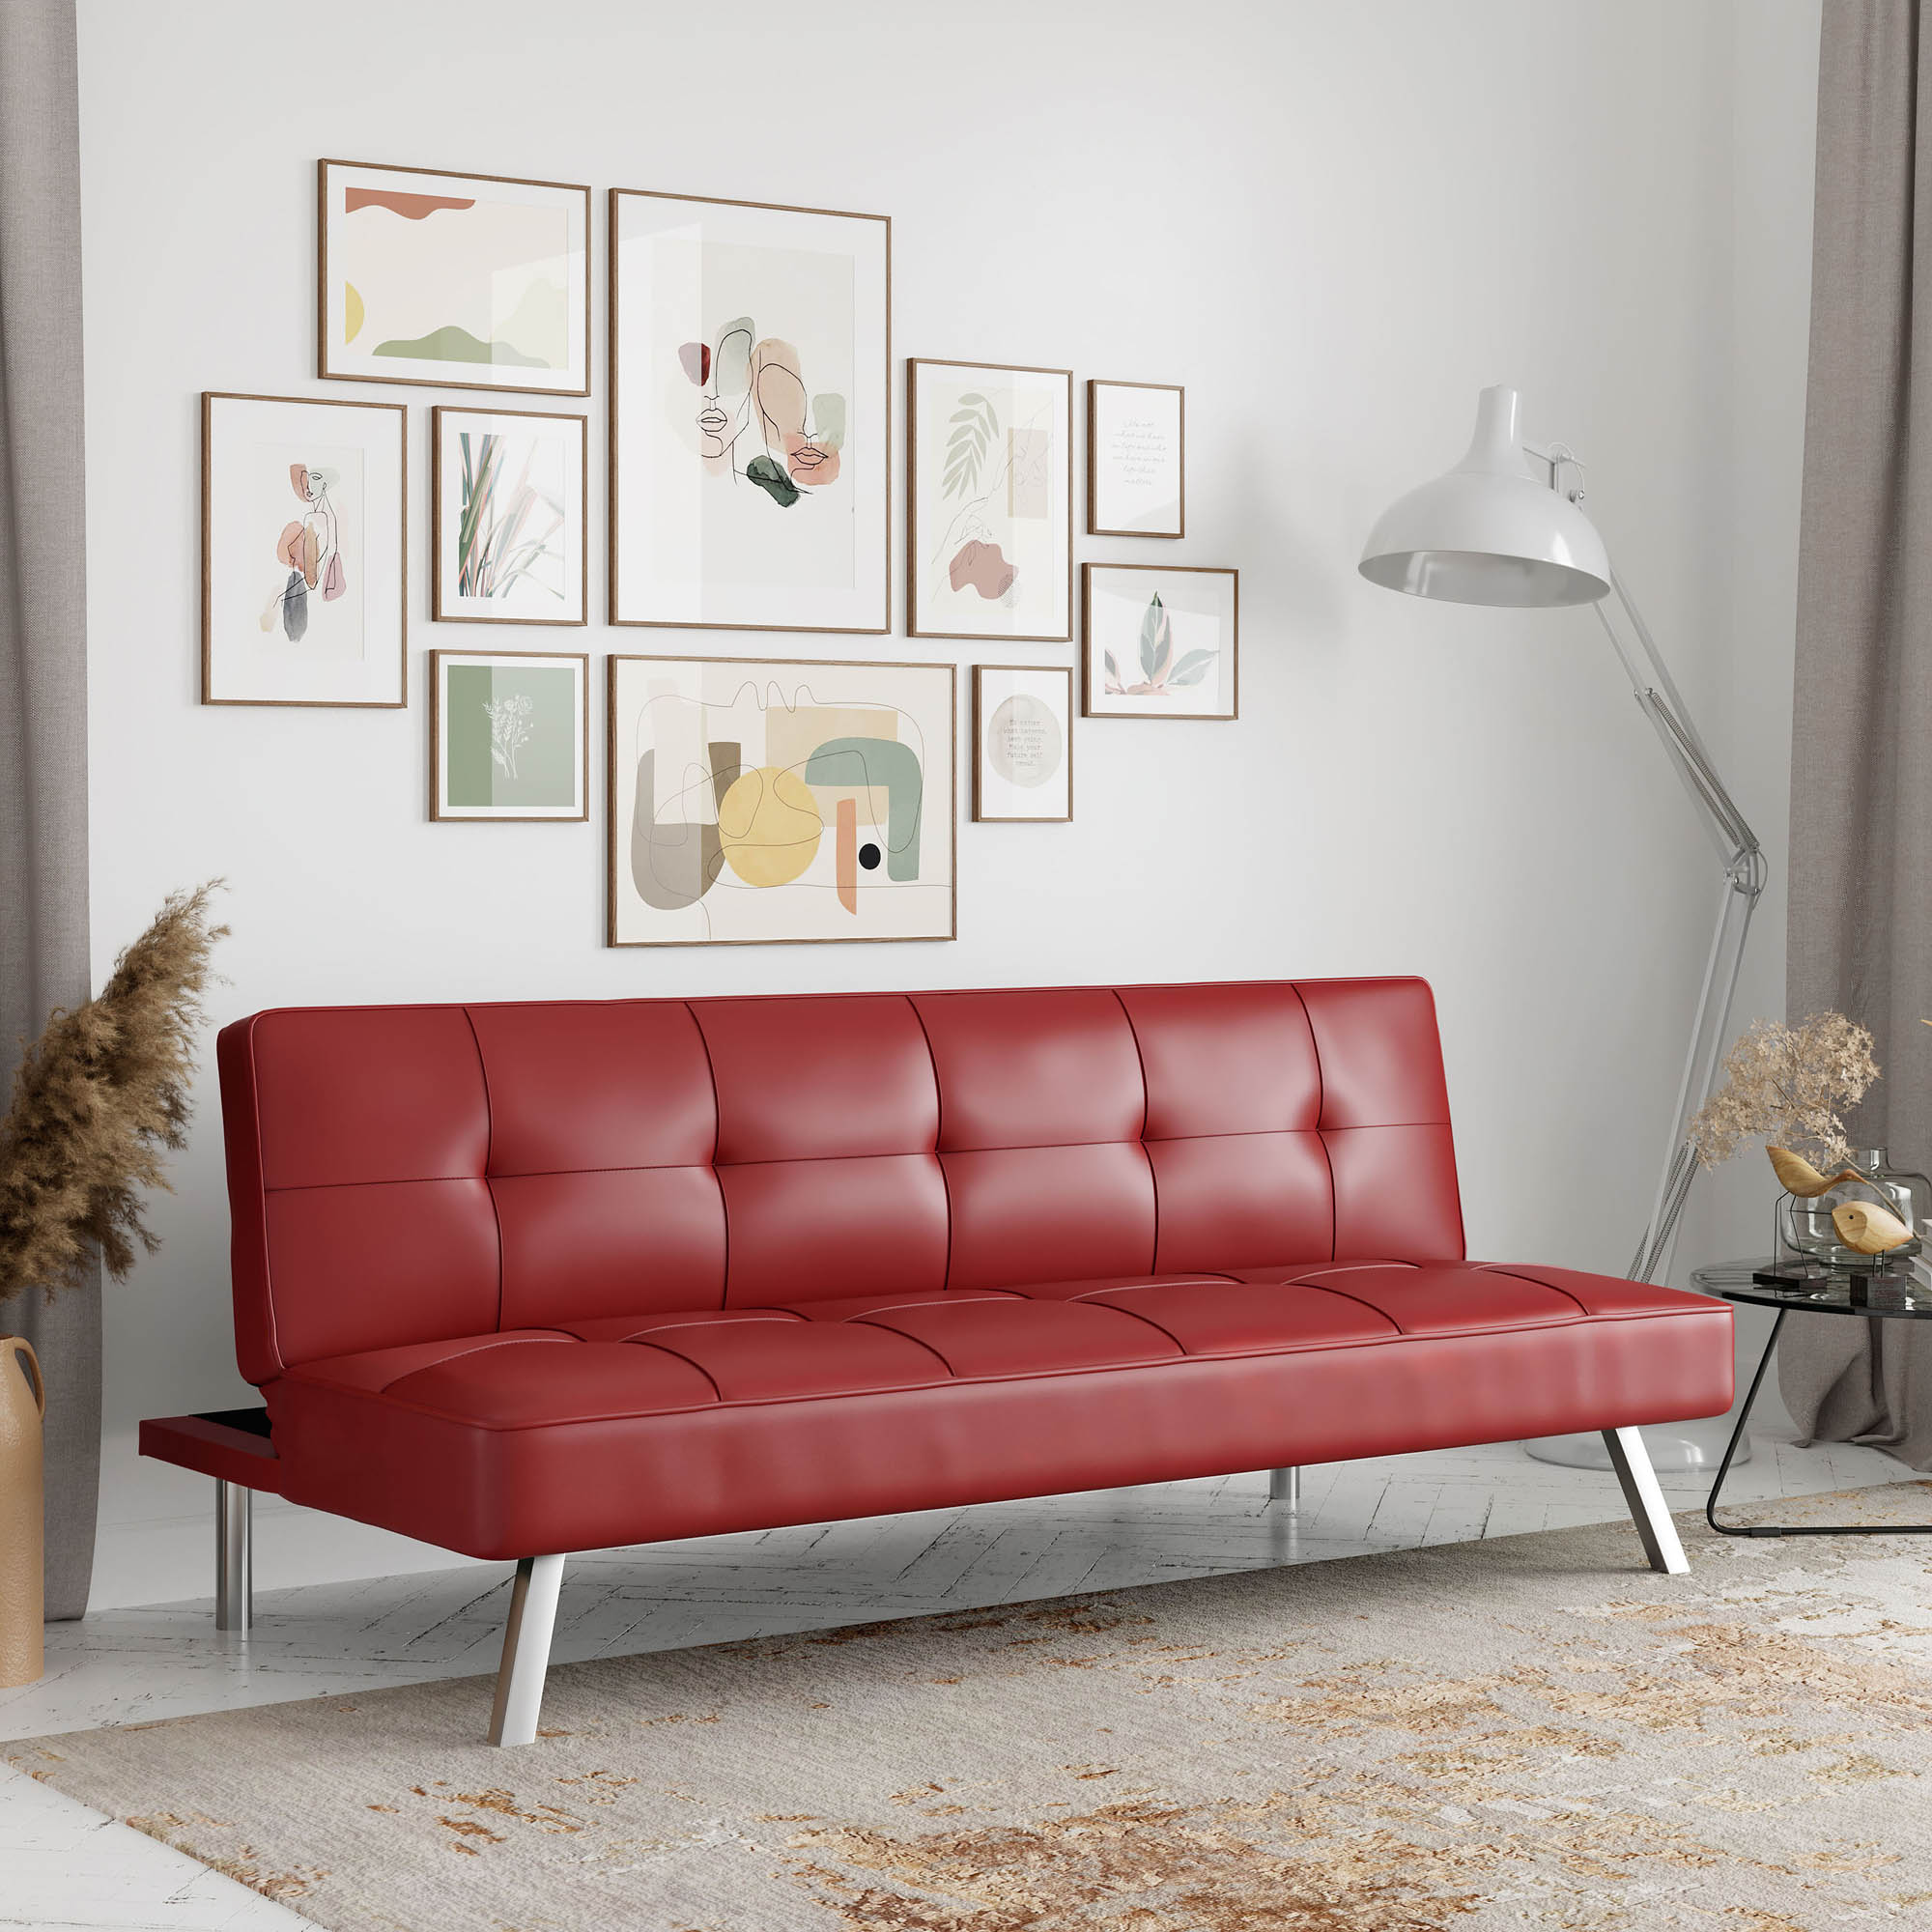 Serta Chelsea Modern Futon, Red Faux Leather - image 1 of 12